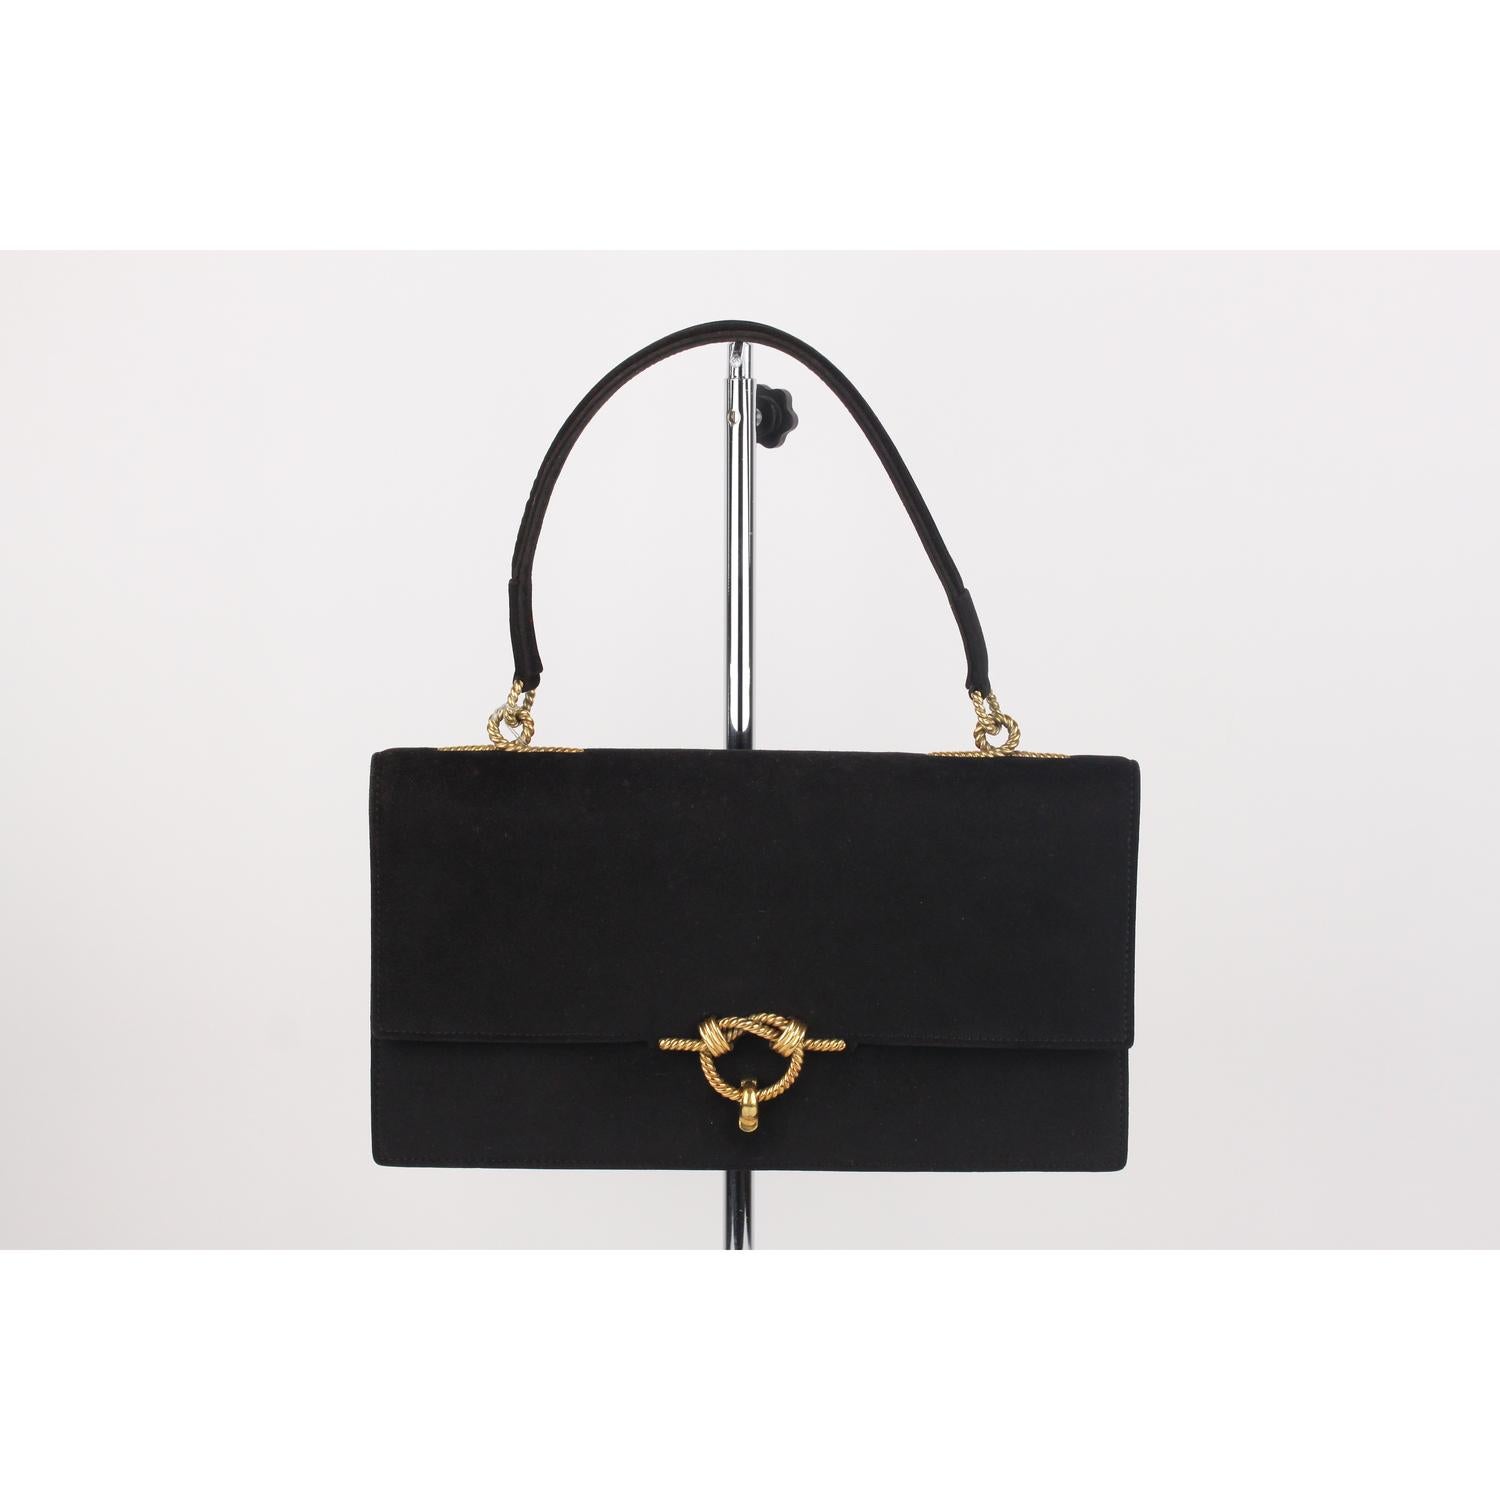 Vintage Black suede 'Cordelière' bag from Hermès from the 1960,  featuring a top handle, a fold-over flap top with gold rope clasp closure.  This opens to a black leather interior with 3 side open pockets and 1 side pocket with flap. 'HERMES Paris'